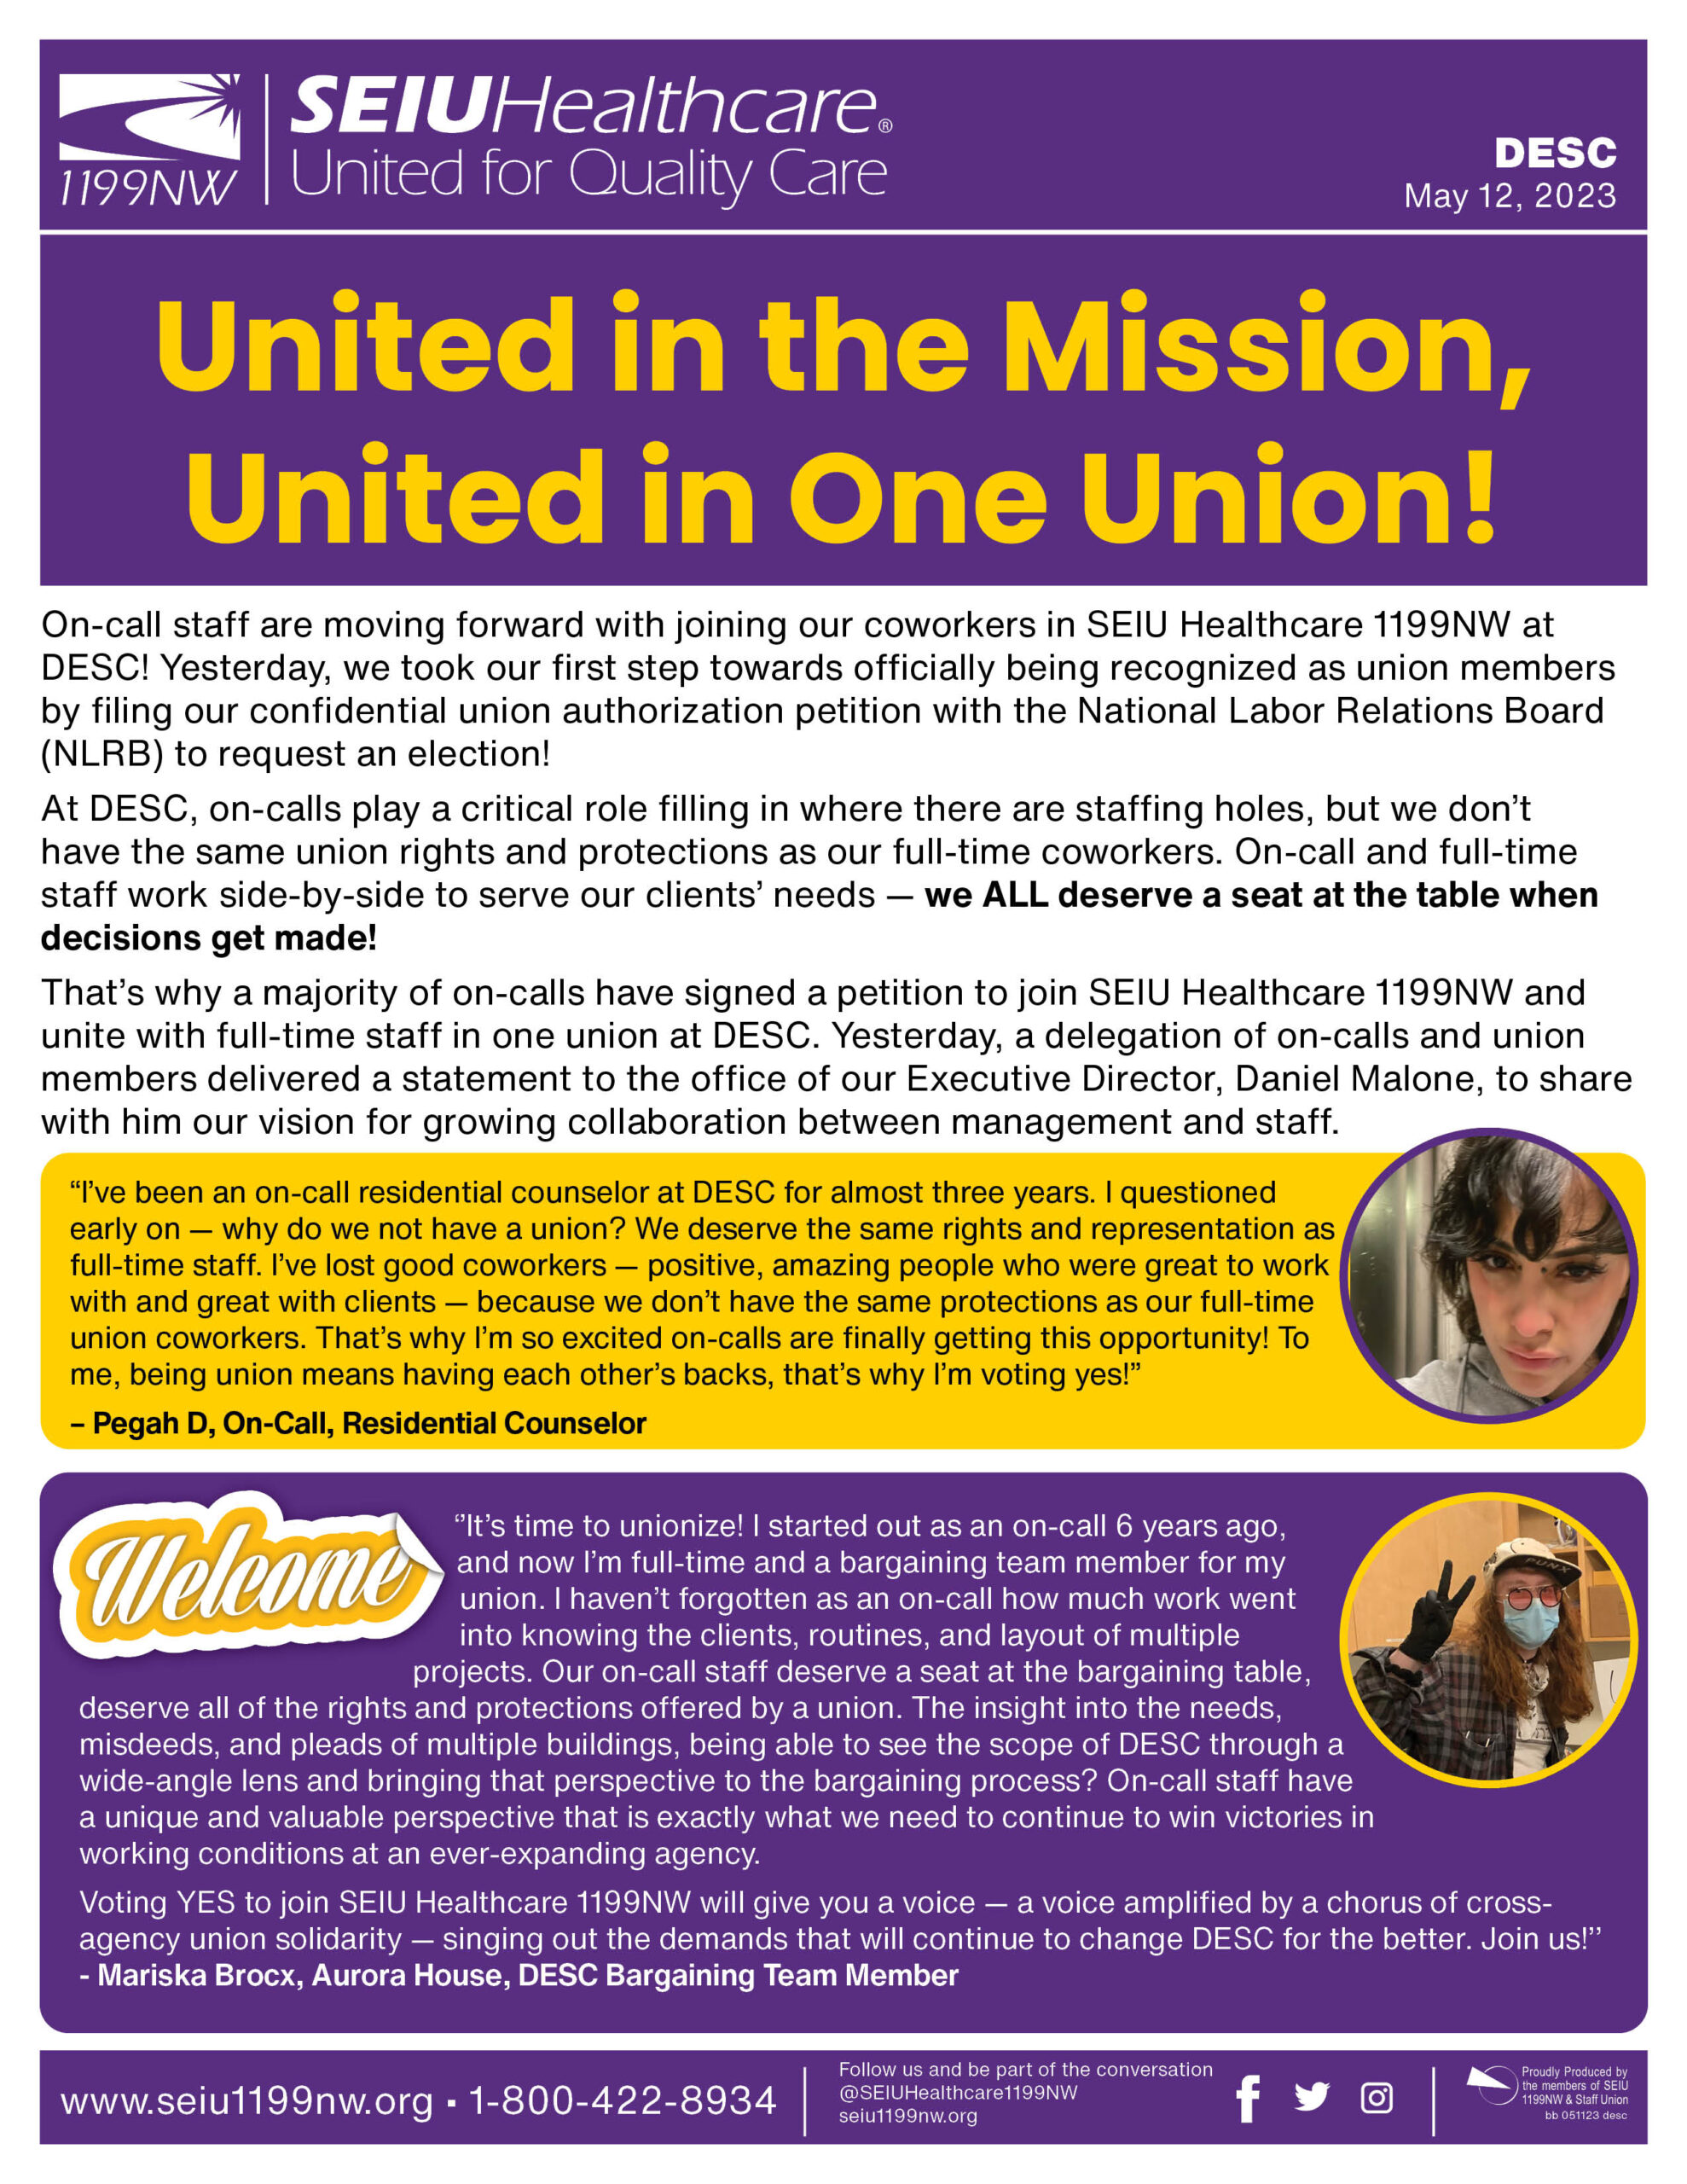 United in the Mission, United in One Union!